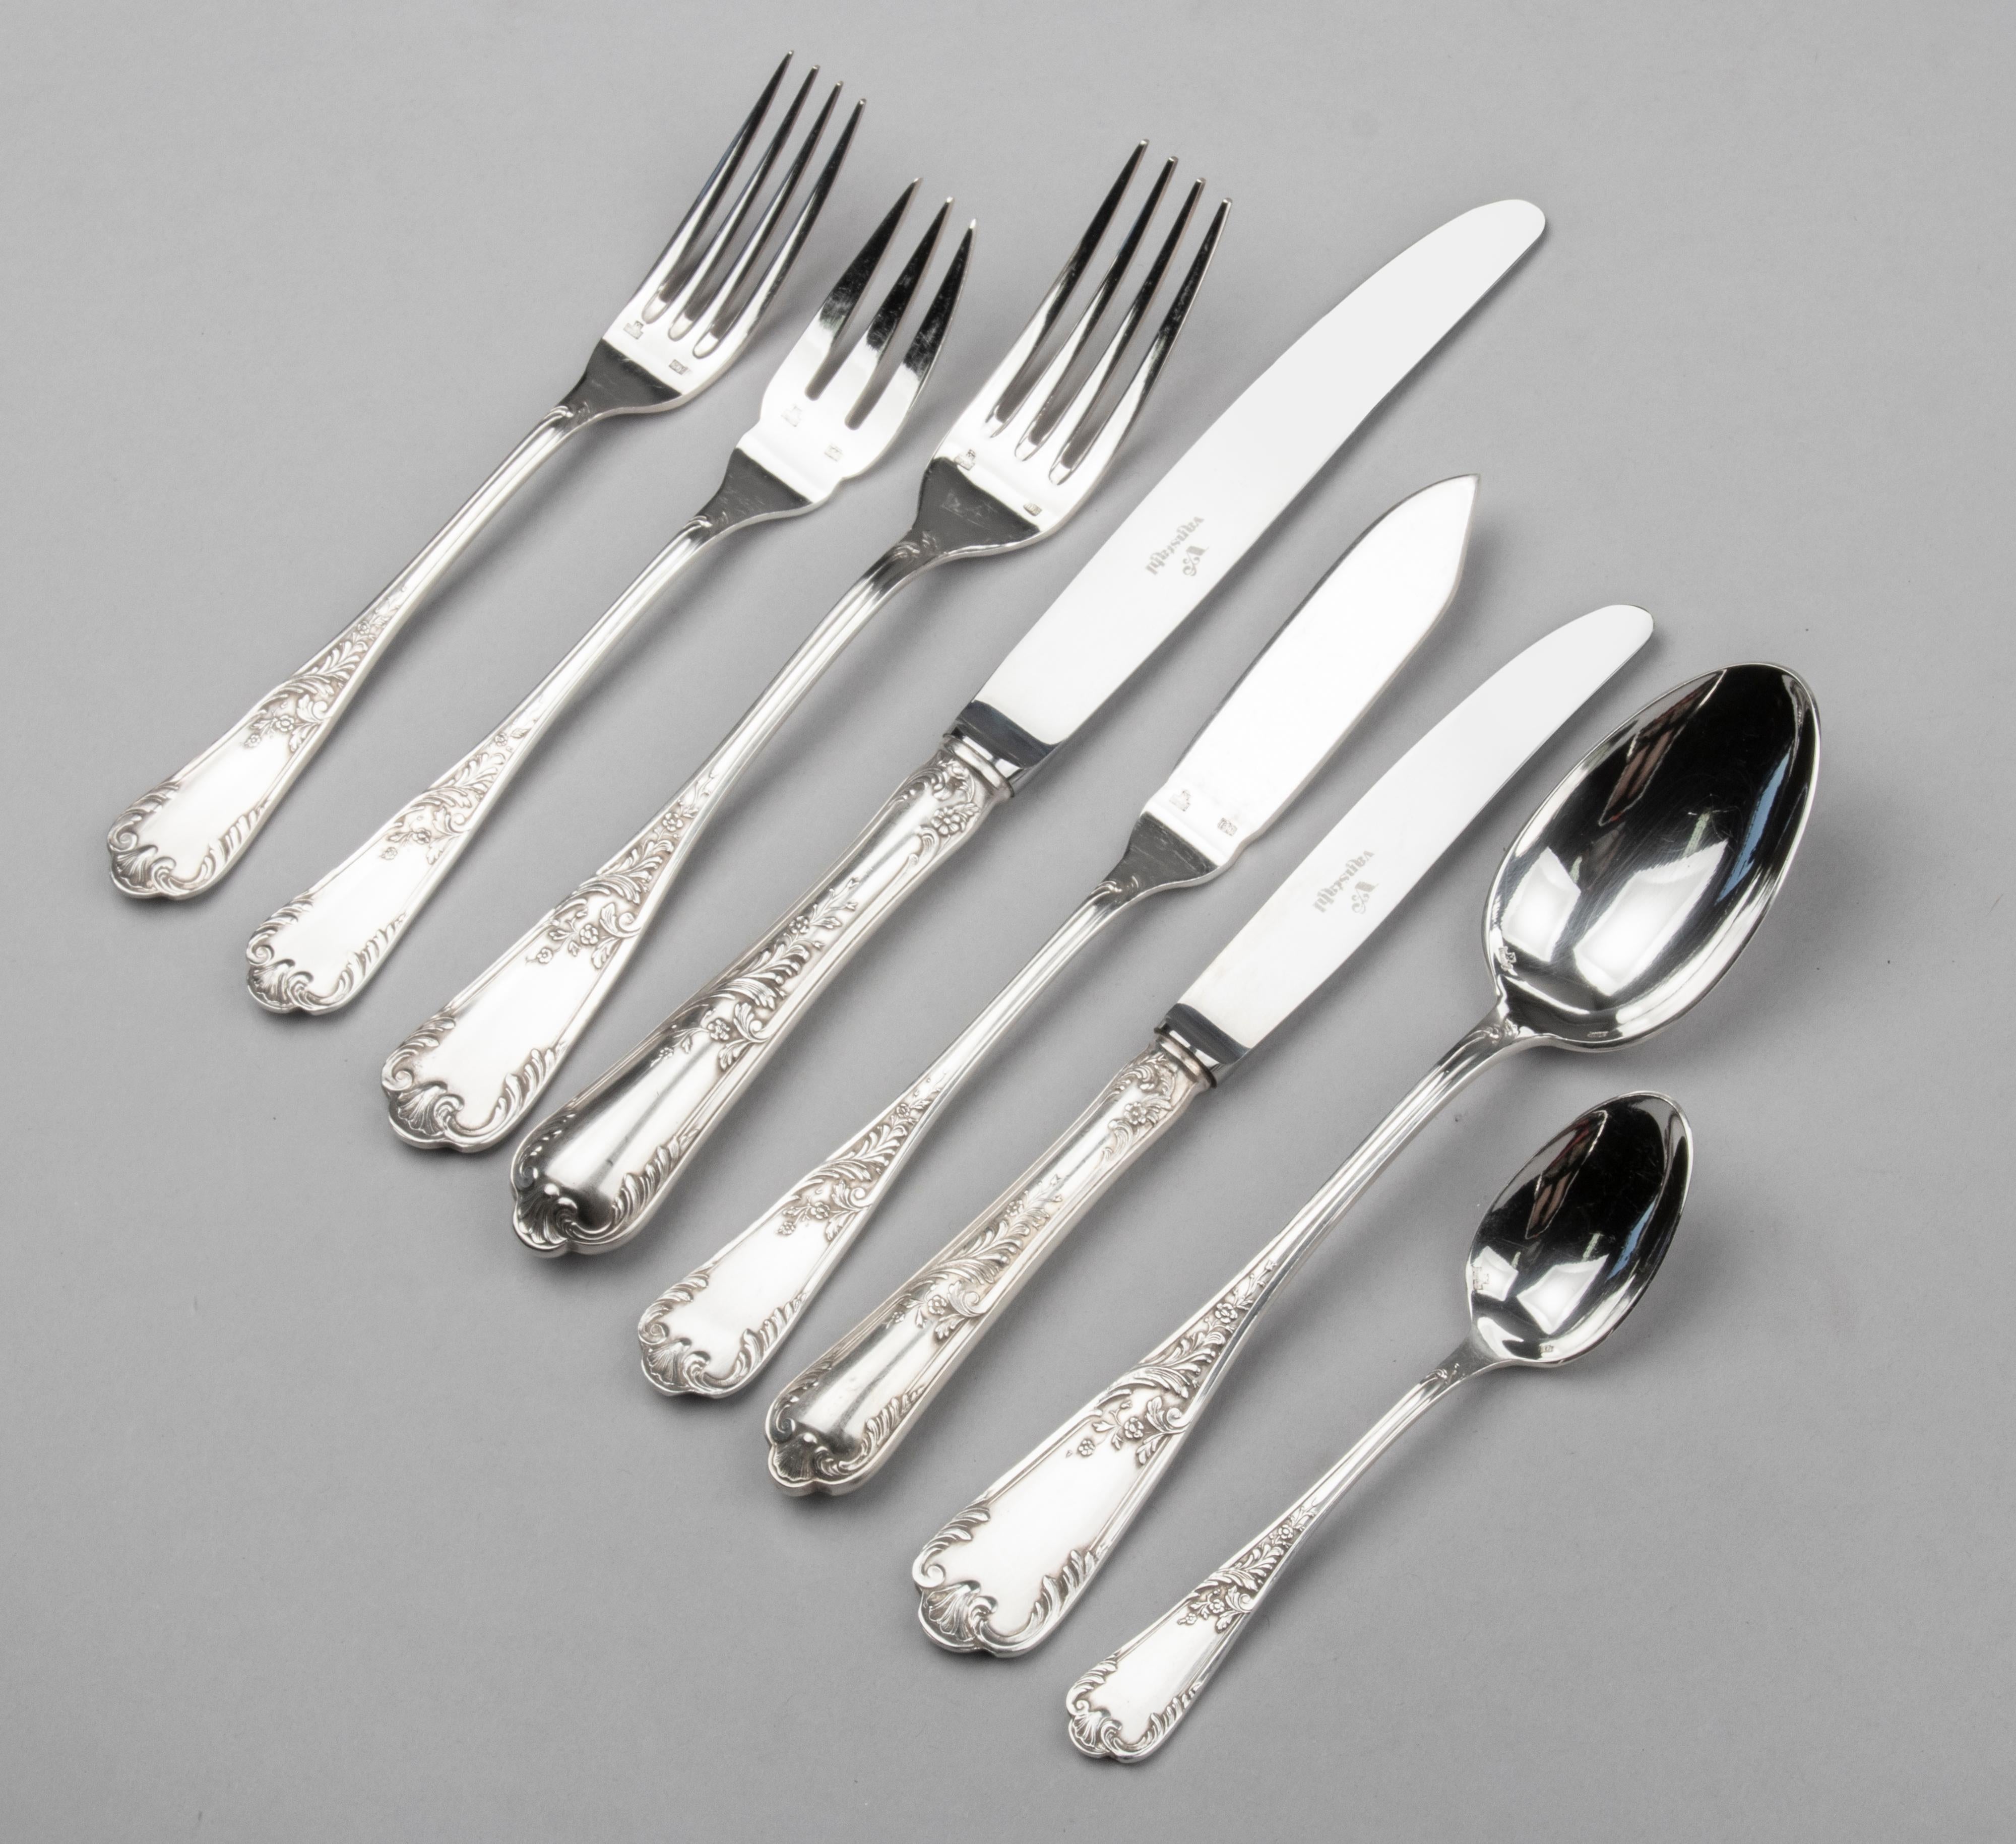 102-Piece Silver-Plated Flatware Set Made by Vanstahl Louis XV-Style 7